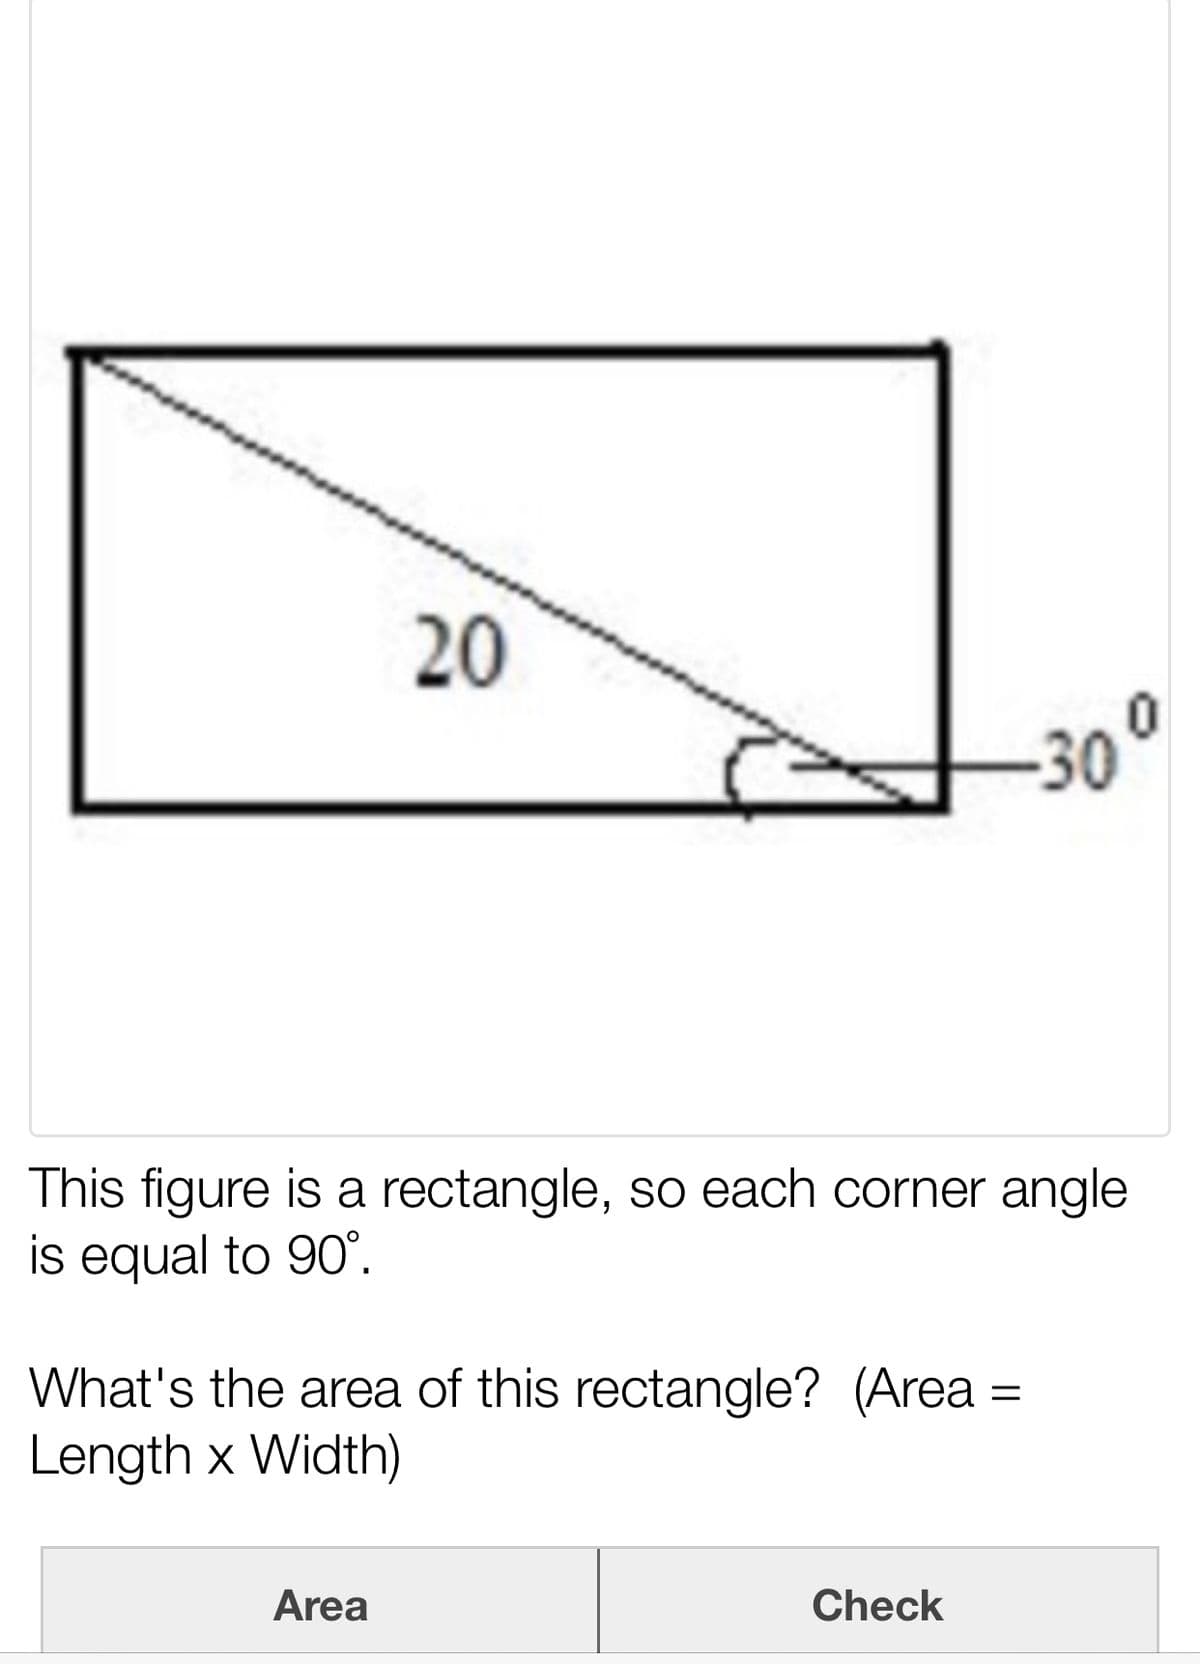 20
30°
This figure is a rectangle, so each corner angle
is equal to 90°.
What's the area of this rectangle? (Area
Length x Width)
Area
Check
